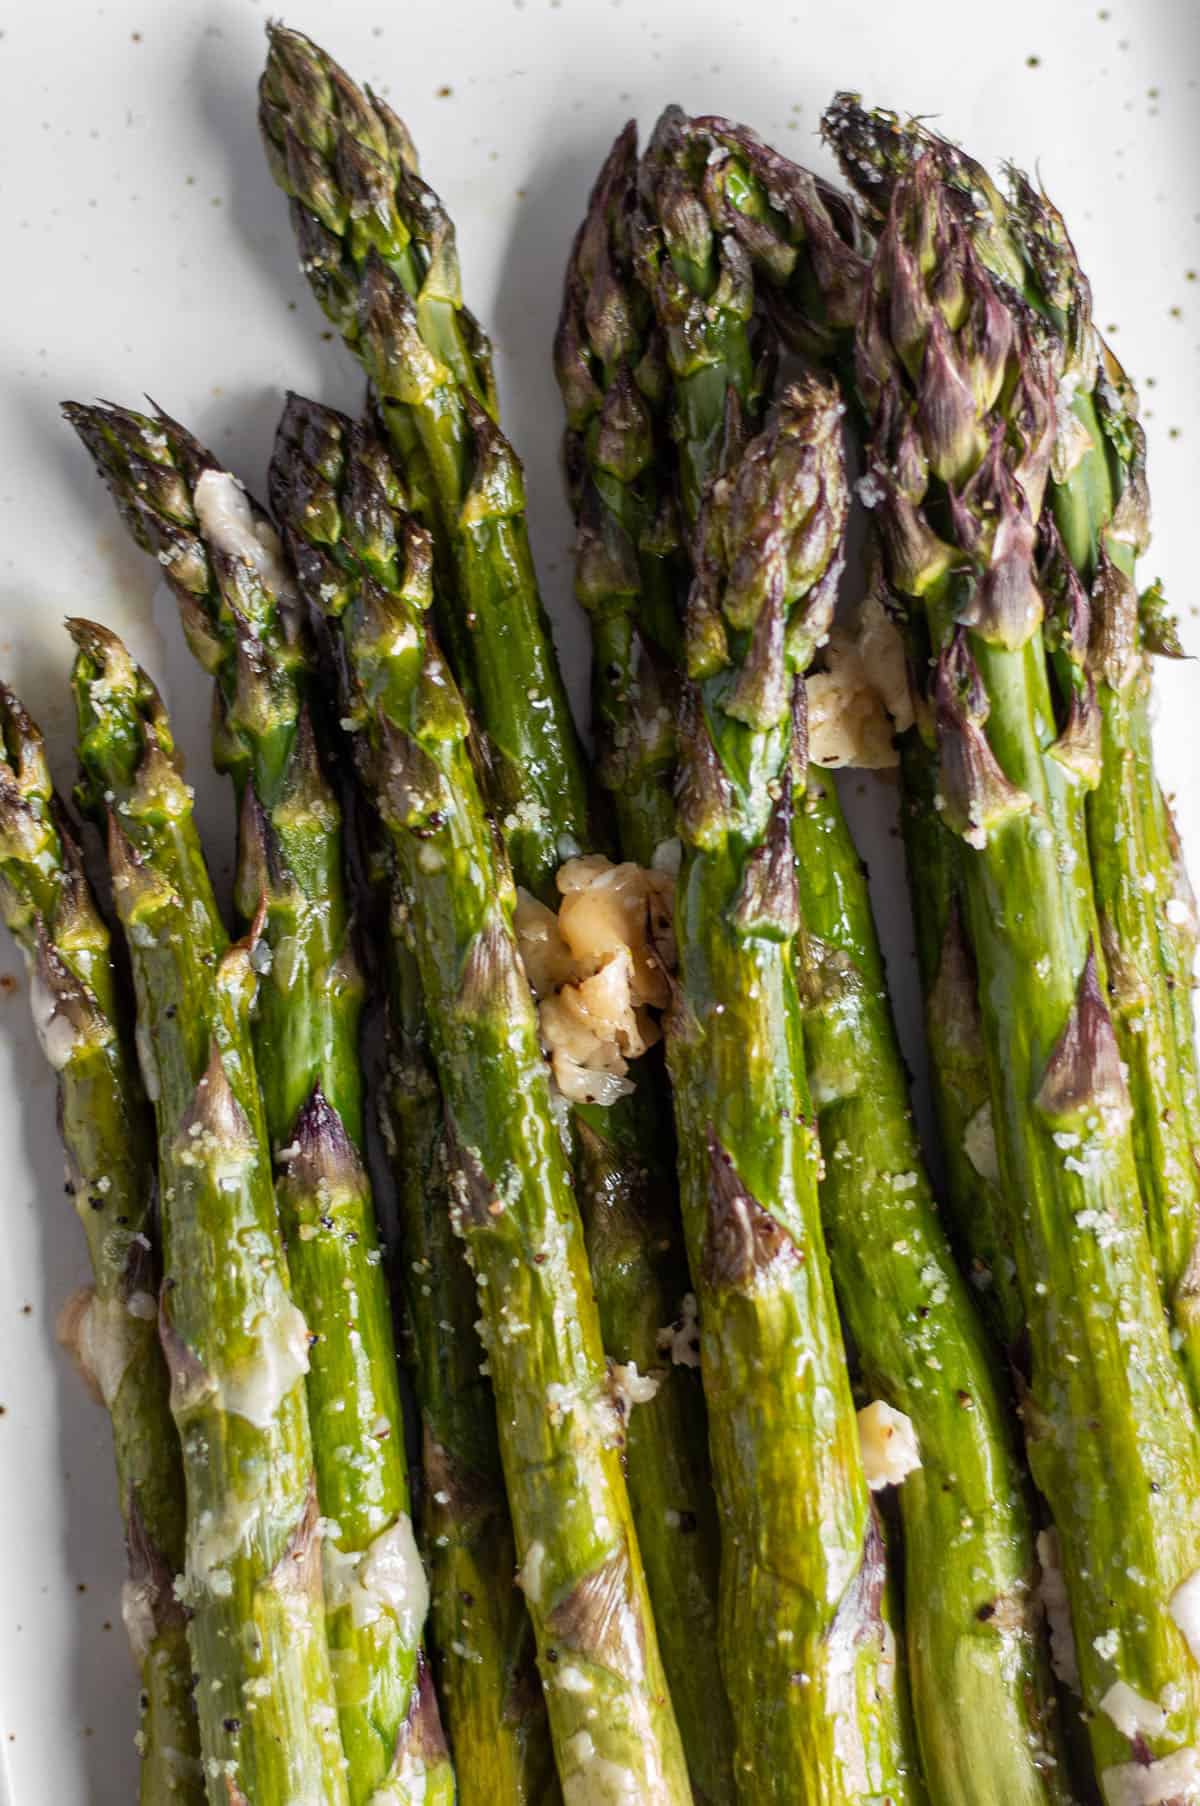 Oven-roasted asparagus with flakes of parmesan cheese. 